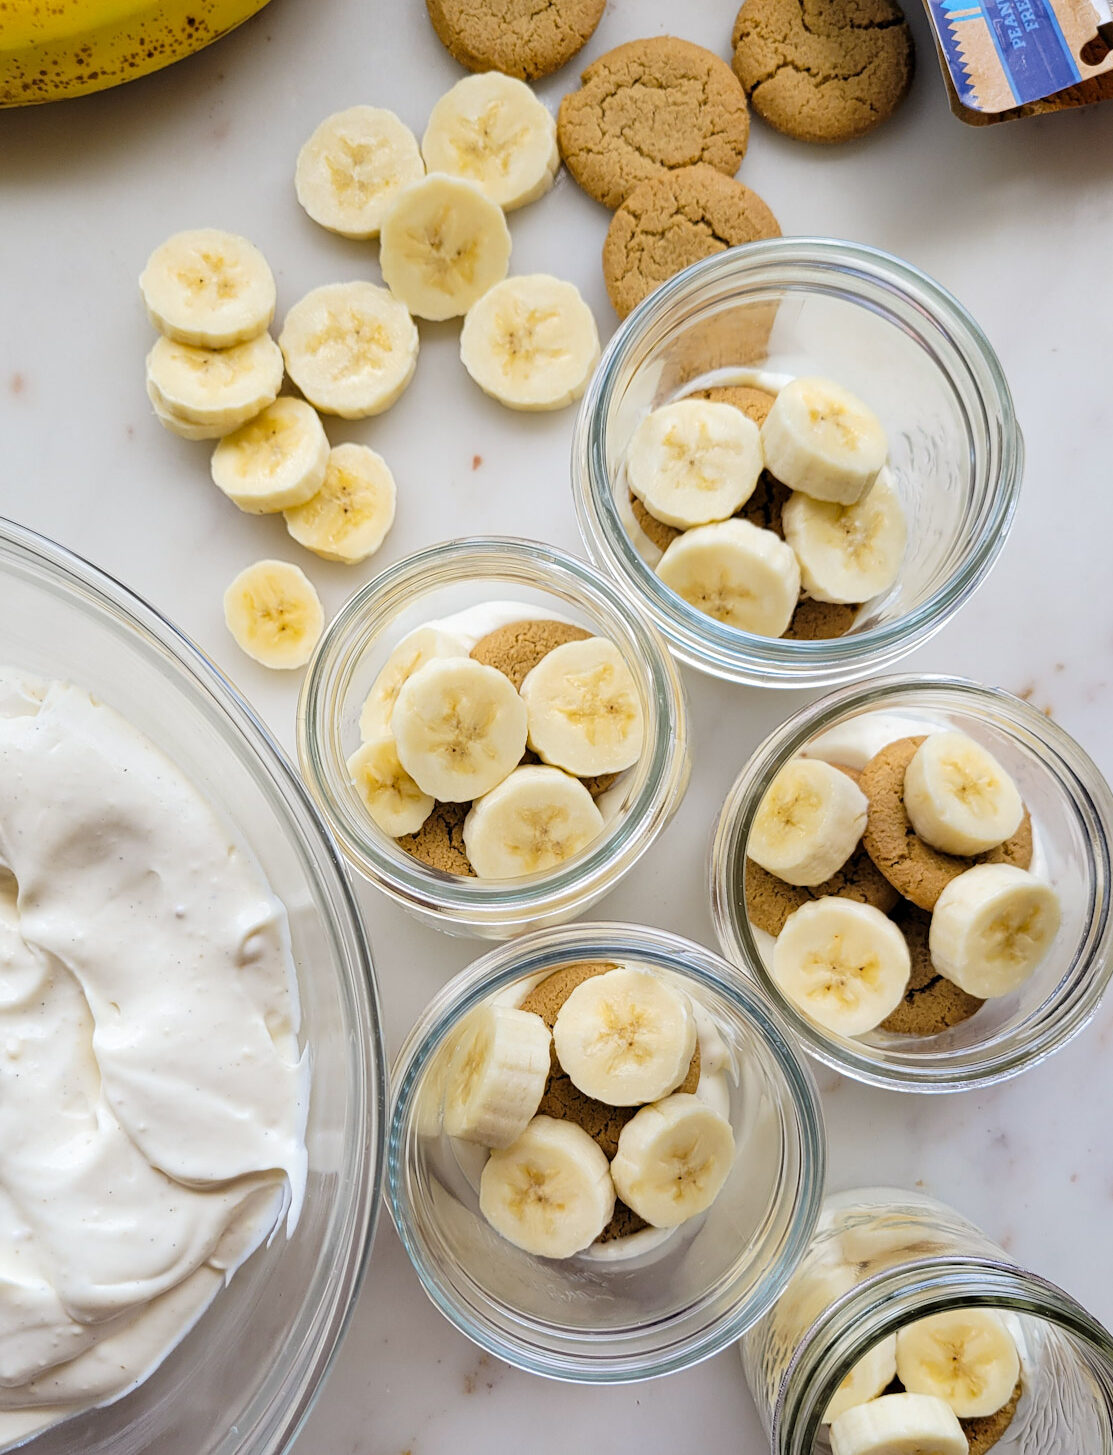 Looking down on the sliced banana layer in mason jars for Classic Banana Pudding.